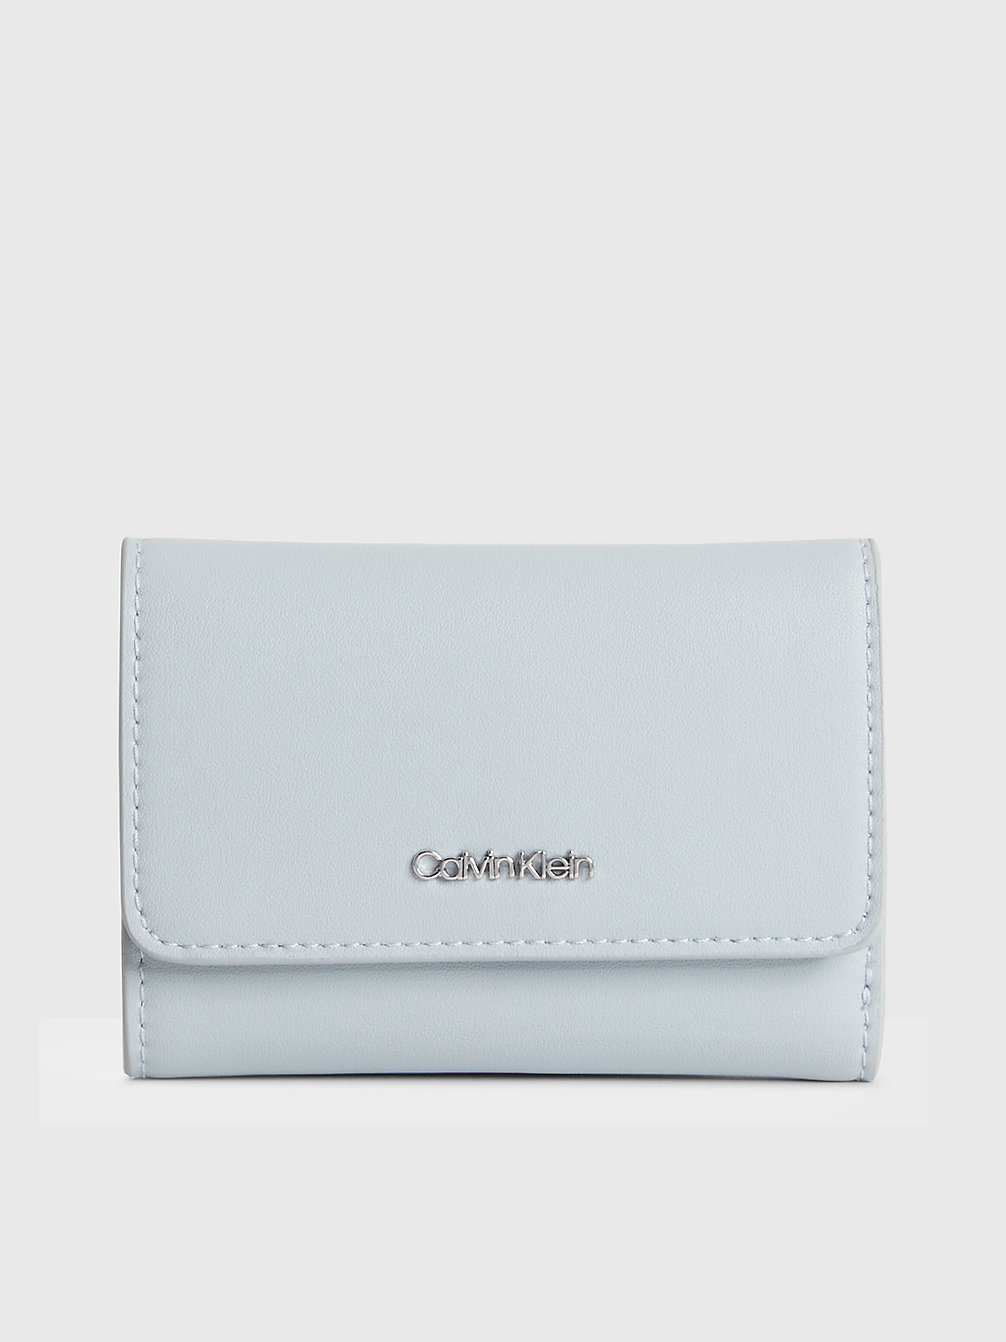 PEARL BLUE Small Recycled Rfid Trifold Wallet undefined women Calvin Klein